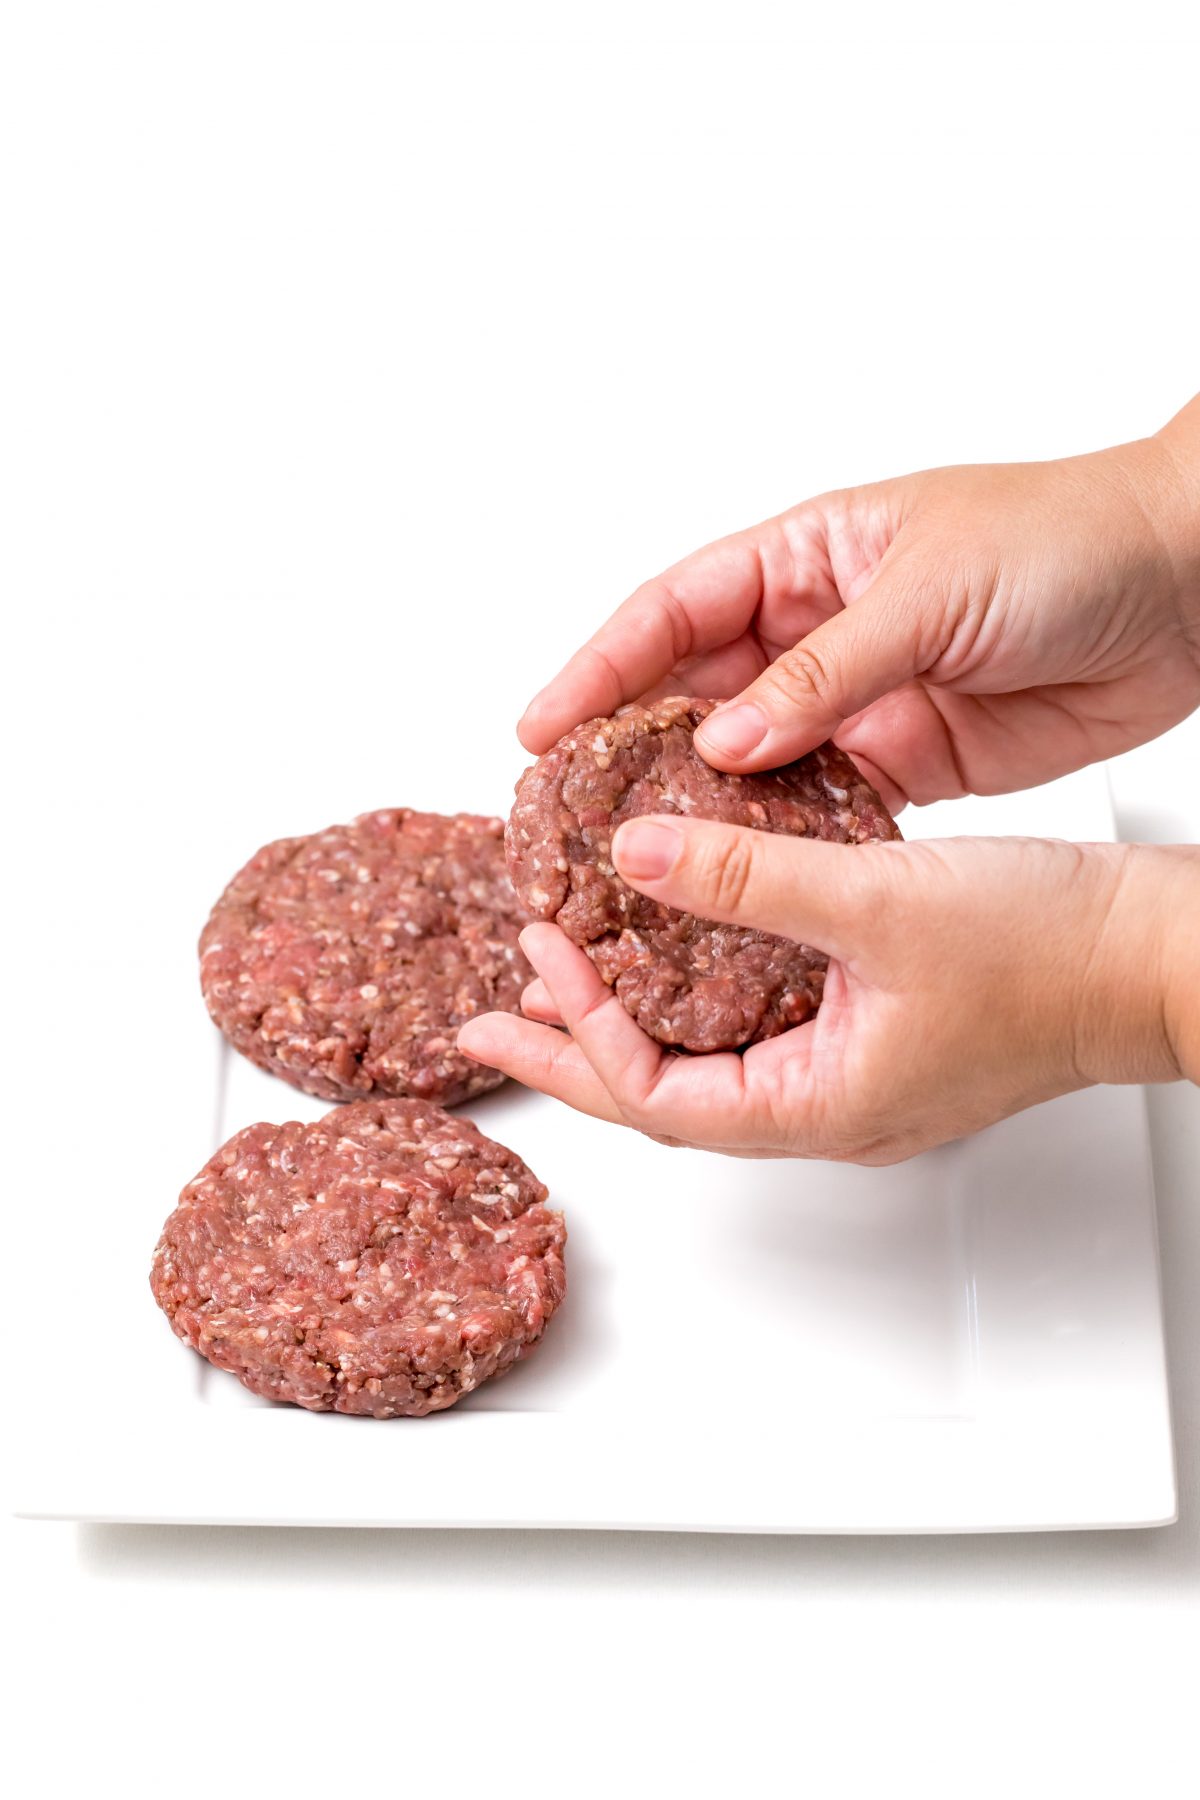 Oven baked burgers making burger patties from raw meat